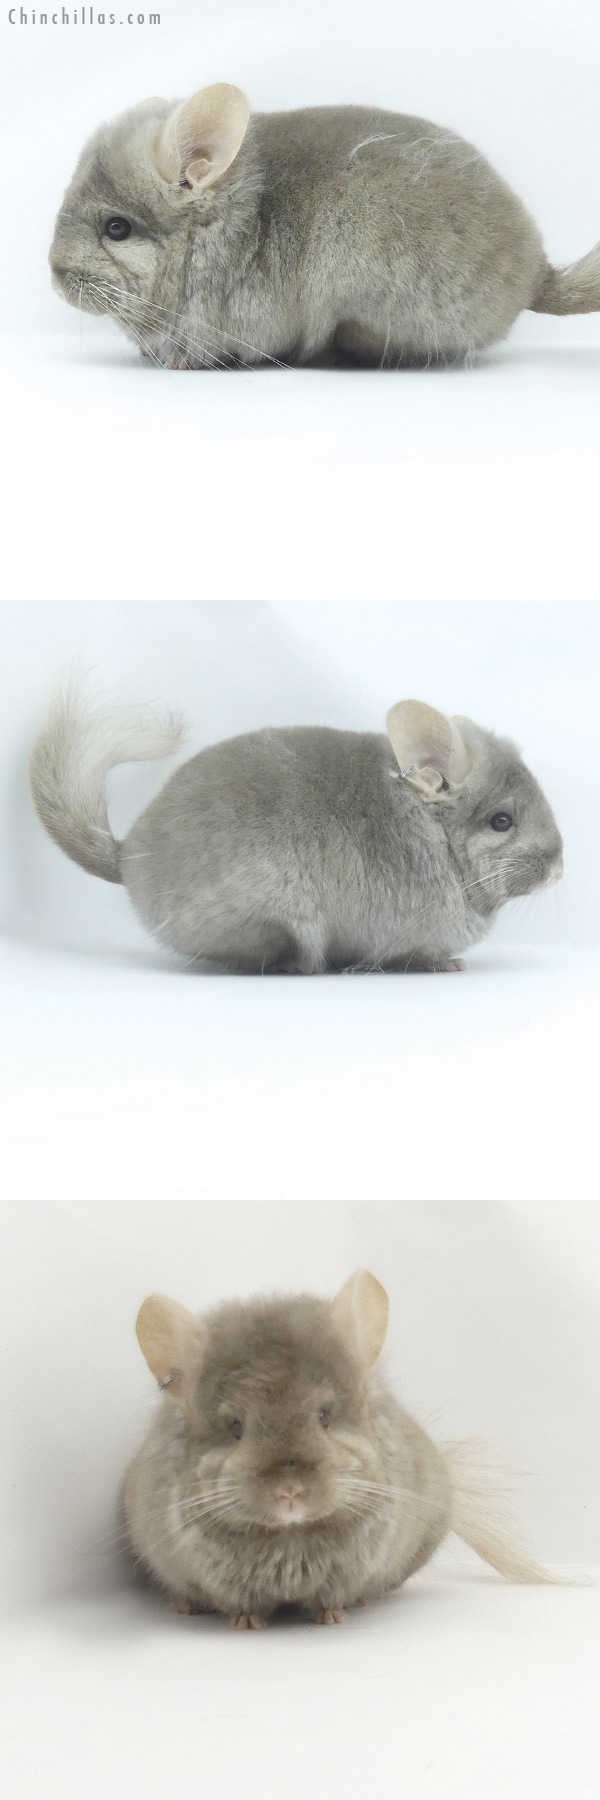 Chinchilla or related item offered for sale or export on Chinchillas.com - 19502 Tan  Royal Persian Angora Female Chinchilla